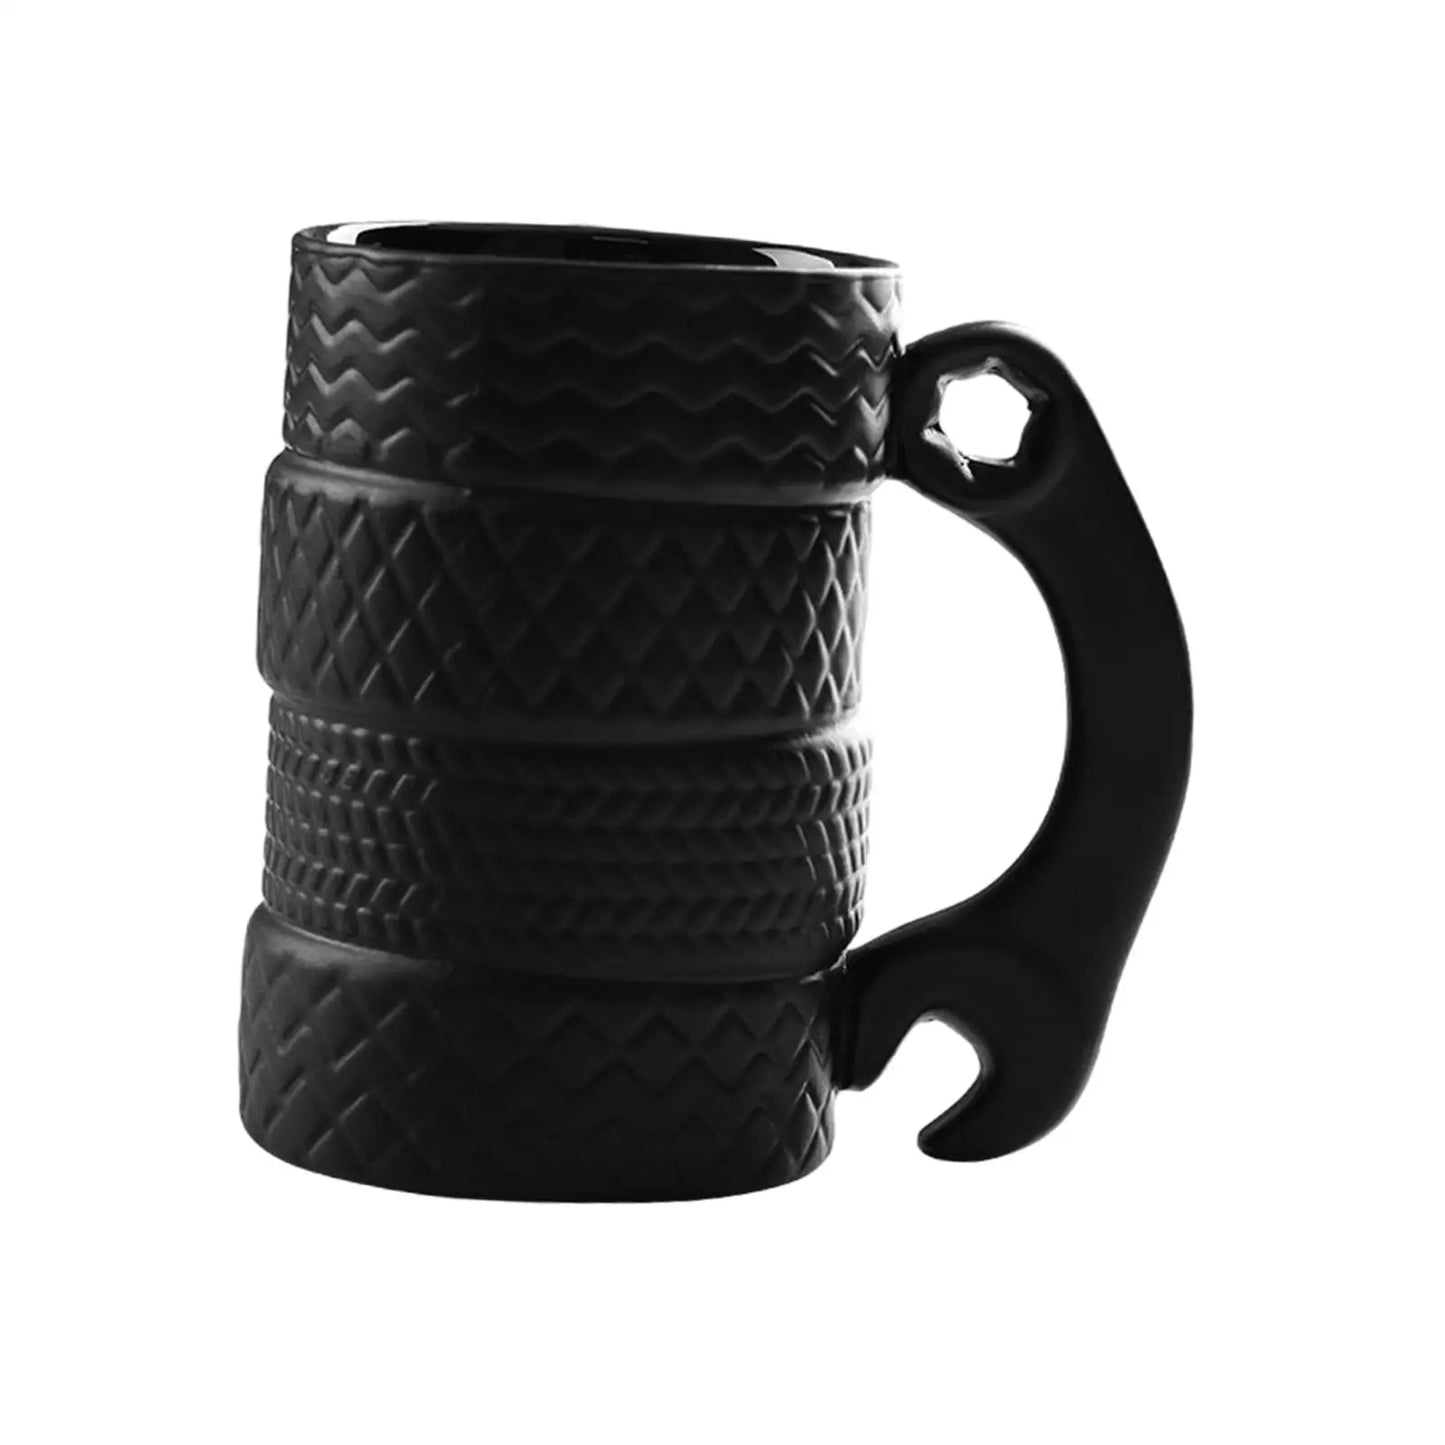 Wheel Tire Coffee Mug Drinkware Birthday Gift Unique with Handle Collections Breakfast Cup for Car Lovers Beverage Cup Creative